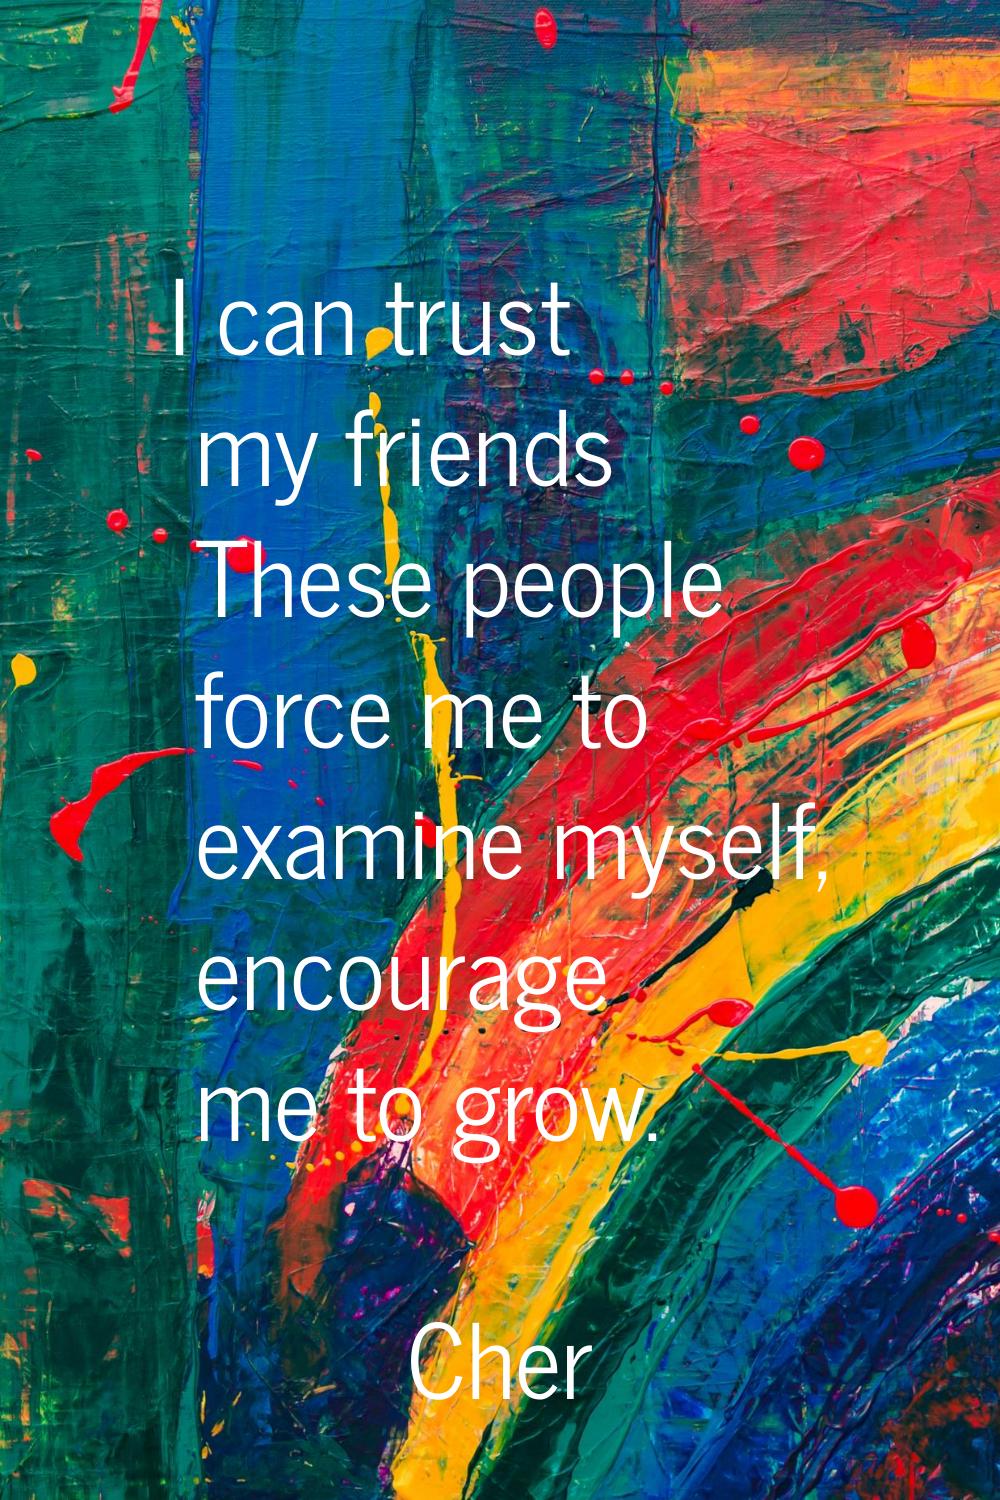 I can trust my friends These people force me to examine myself, encourage me to grow.